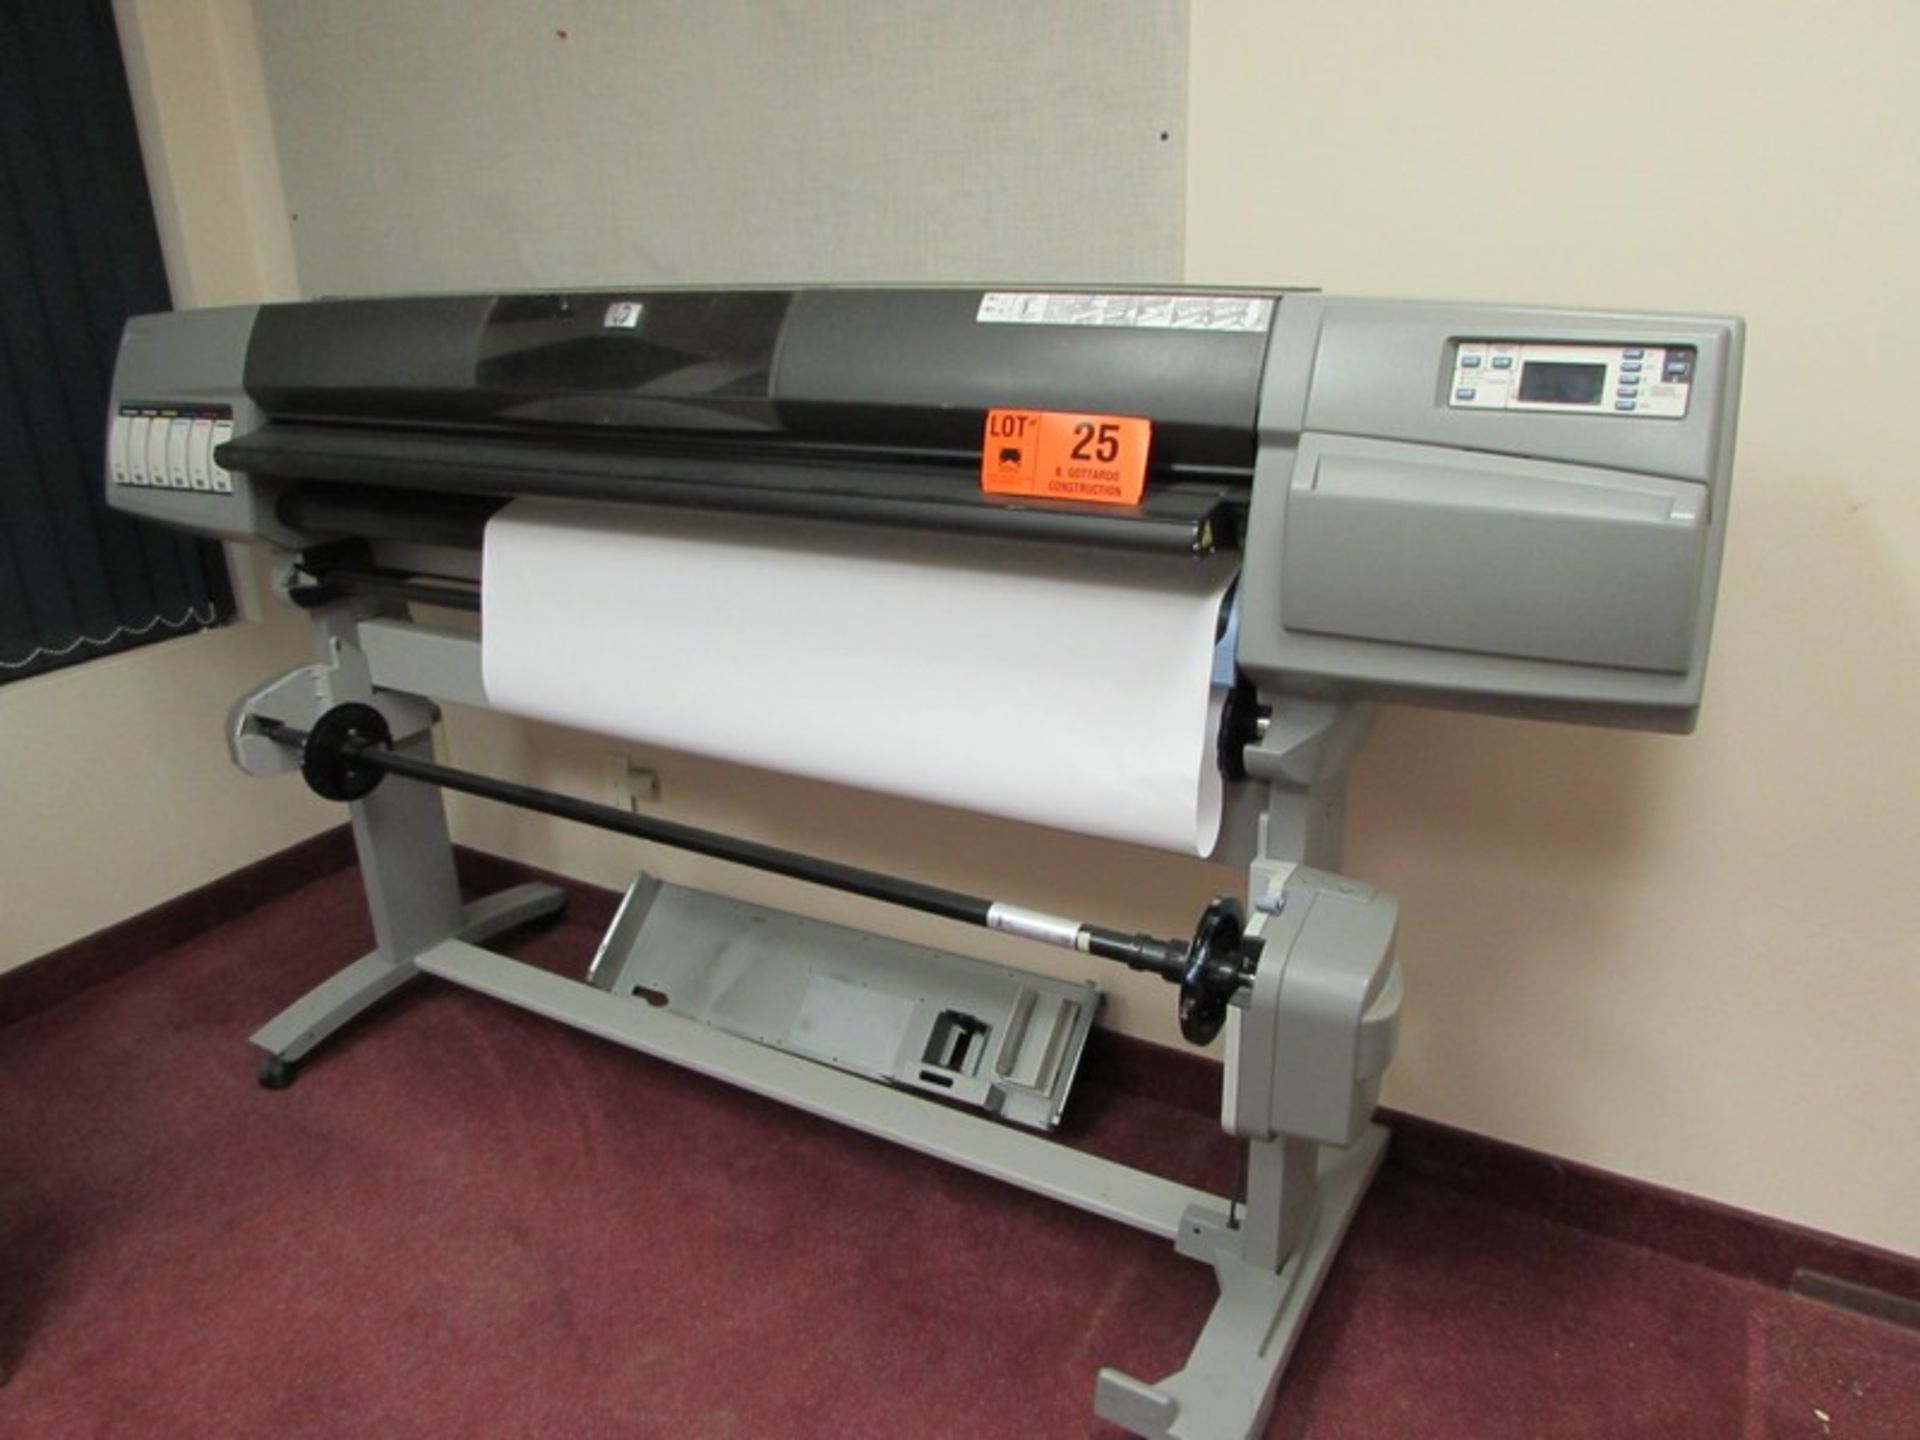 HP DESIGNJET 5500 COLOUR PLOTTER WITH DIRECT PRINTING PATH FOR TIFF, JPEG, CALS/G4, HP-RTL & HP-GL/2